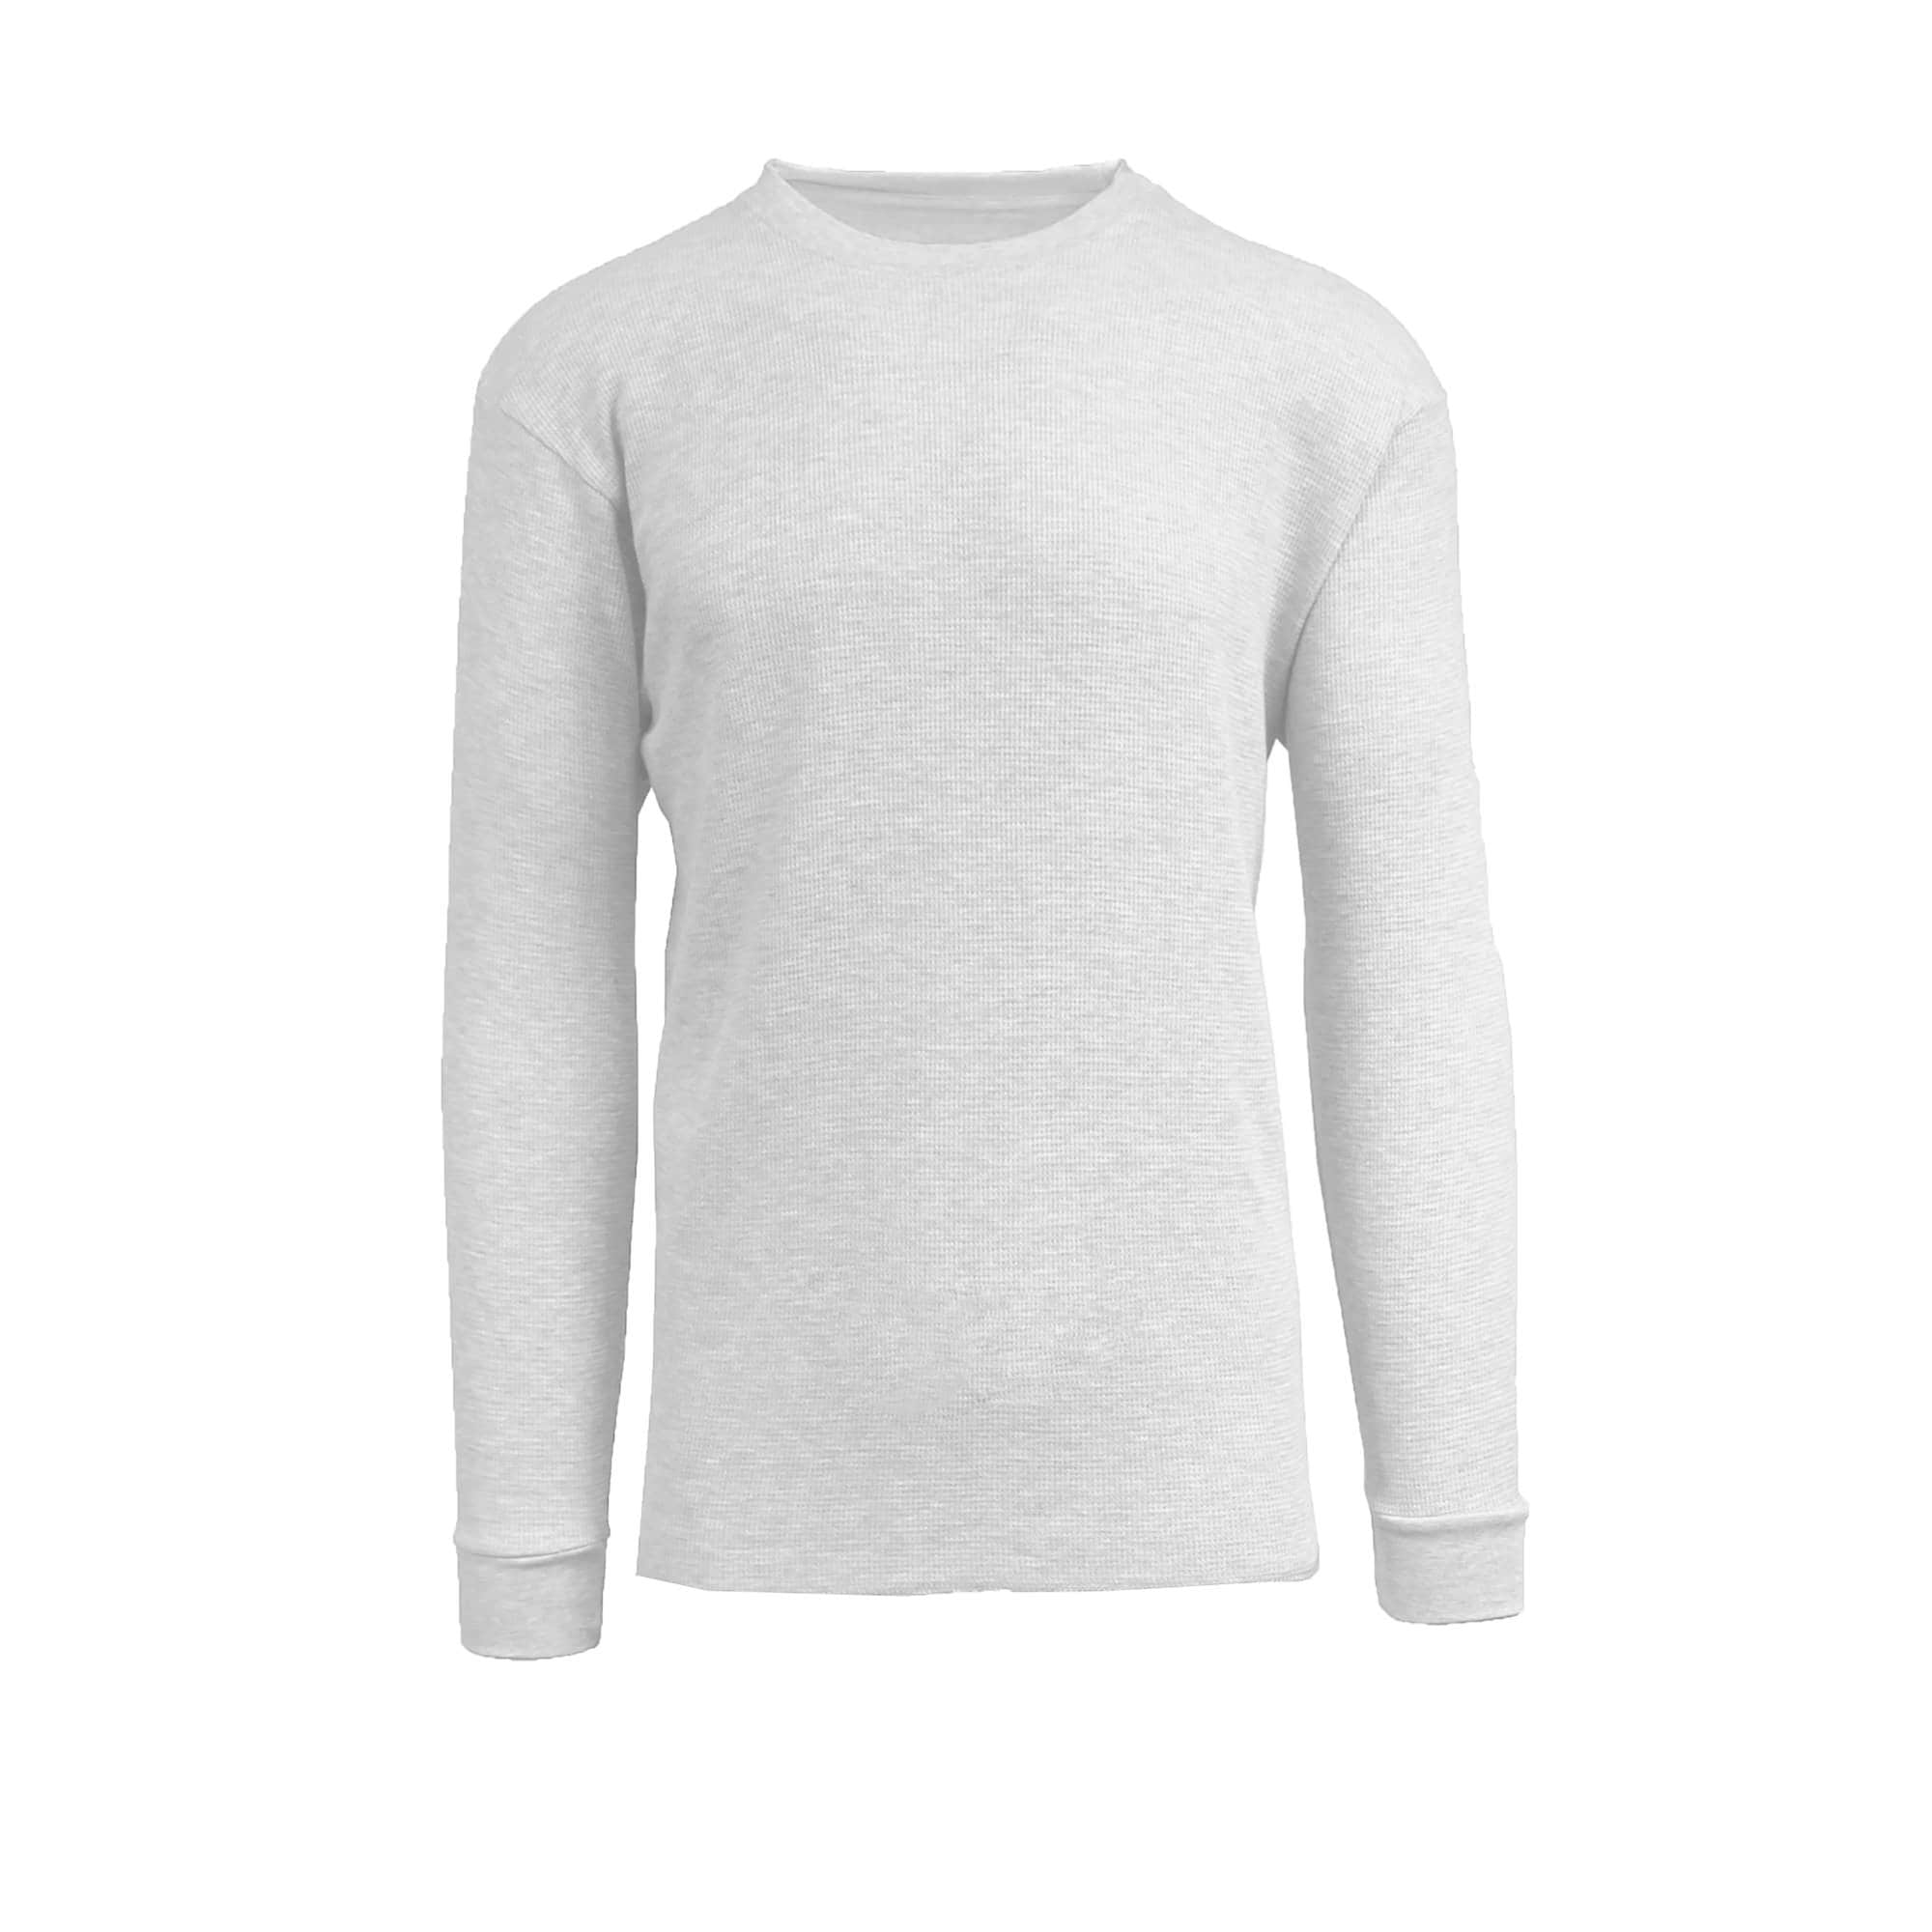 Thermal Shirts Wholesale, Thermals For Men, Wholesale Long Sleeve Shirts